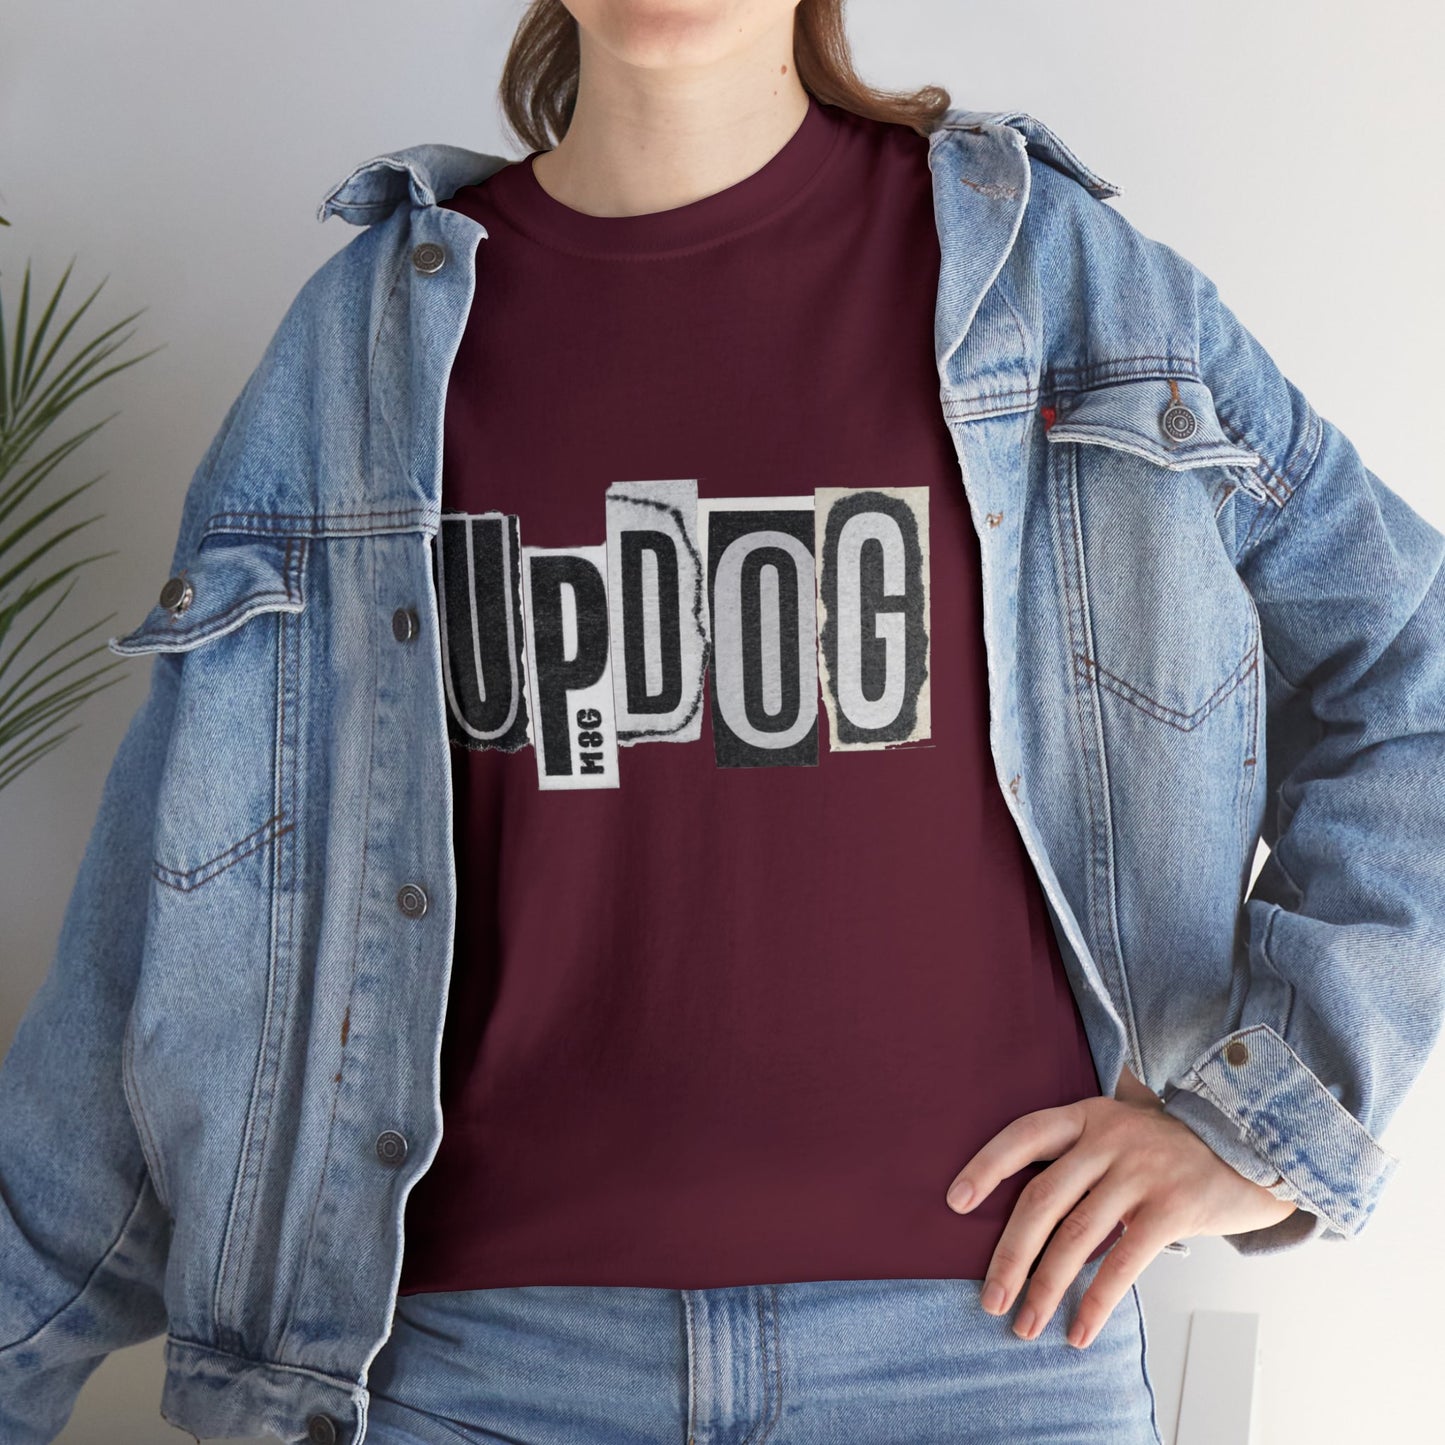 What's Updog?